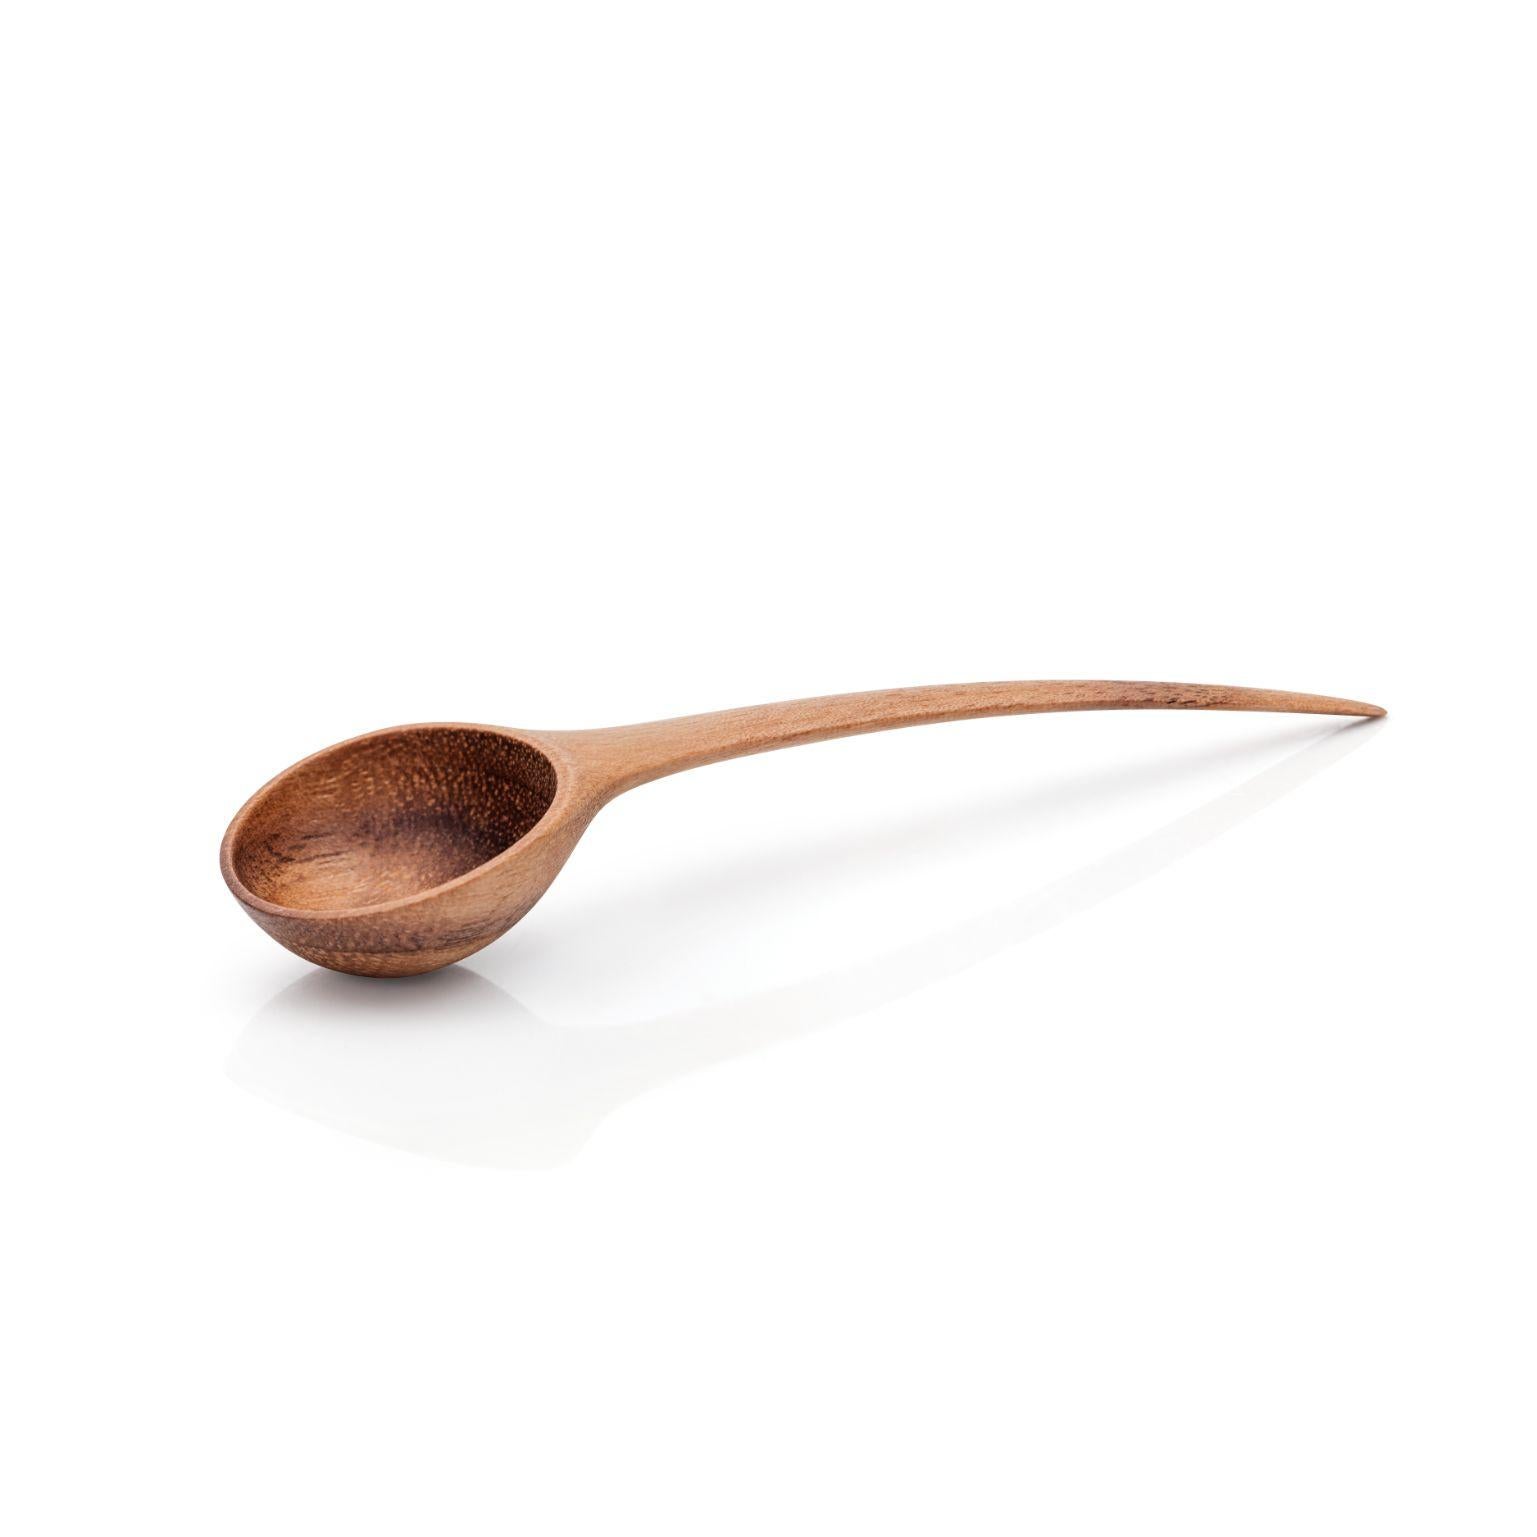 Medium Pisara spoon by Antrei Hartikainen
Materials: Walnut, maple, natural oil wax
Dimensions: W 7-10 cm

Also available in three sizes and a variety of woods.

This range of small spoons are ideal for serving sugar, salt and other